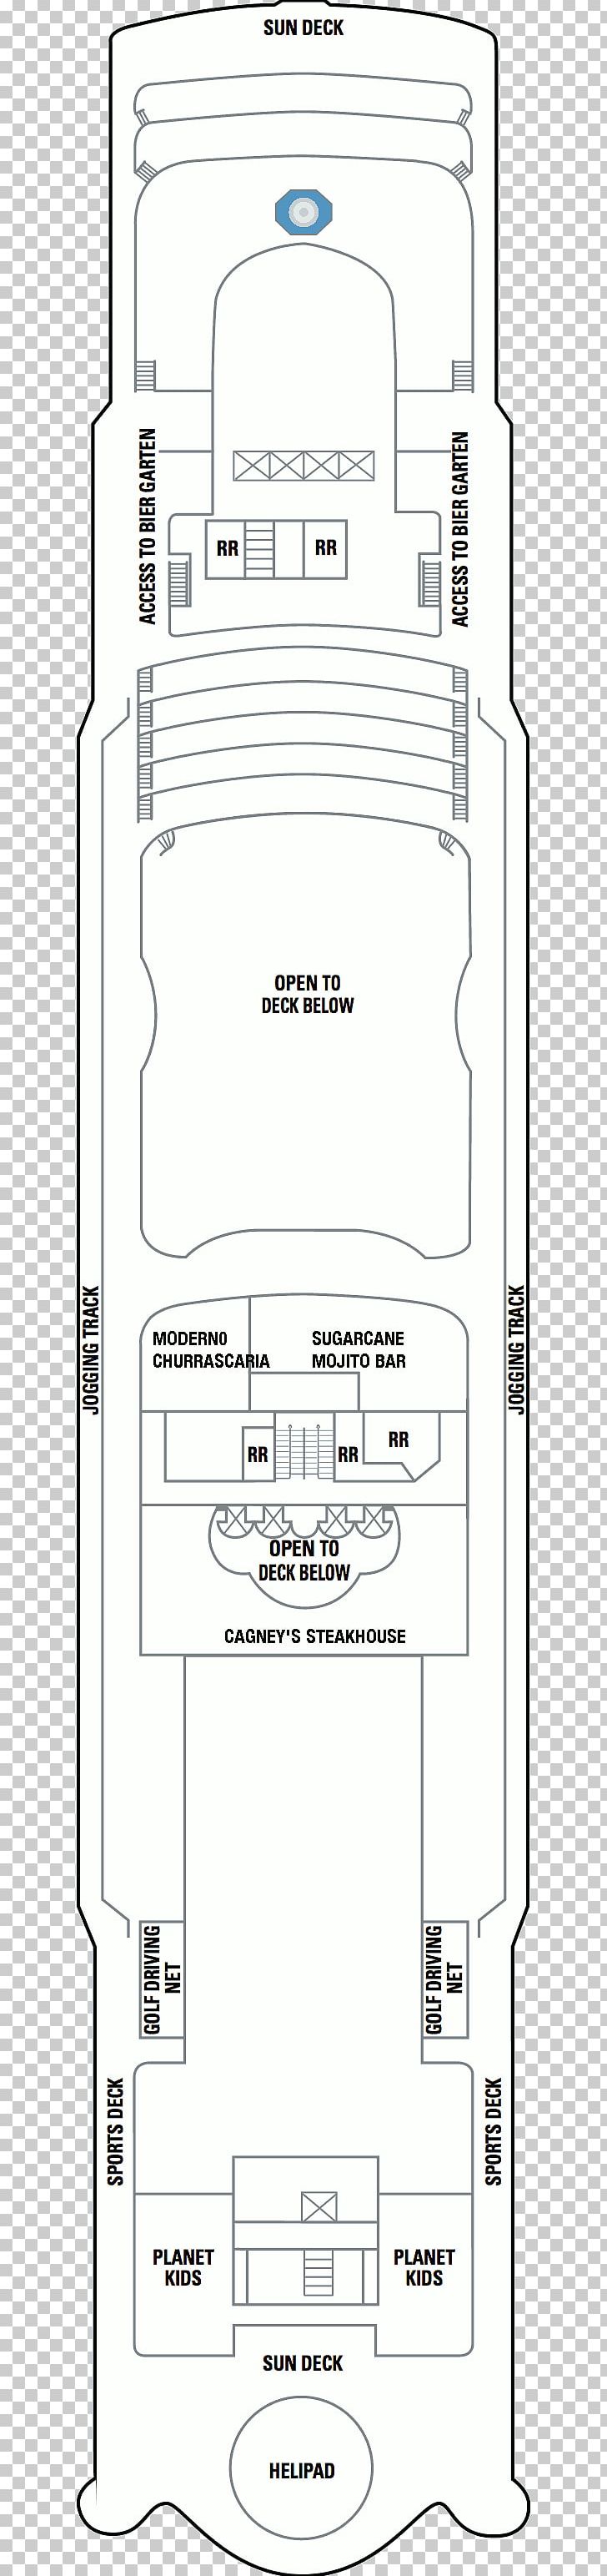 Deck Floor Plan Cruise Ship Celebrity Silhouette PNG